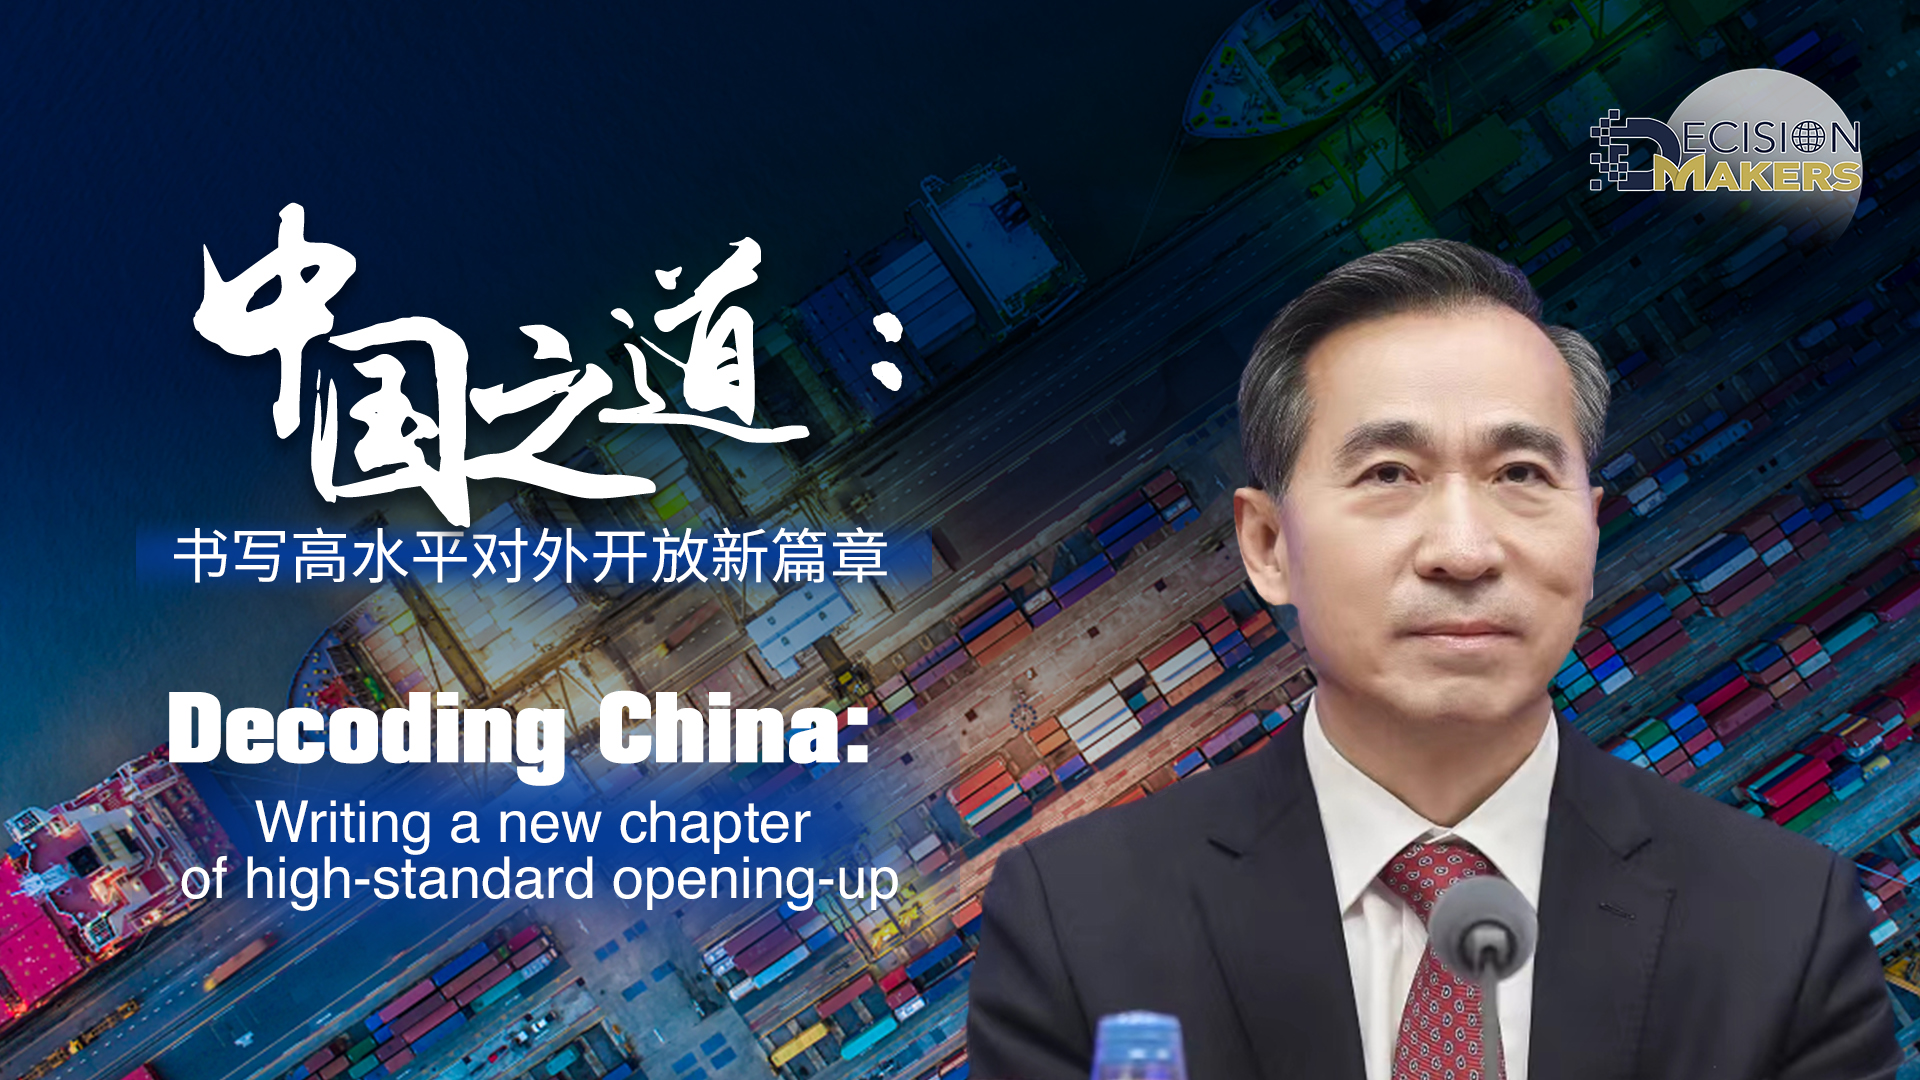 Decoding China: Writing a new chapter of high-standard opening-up